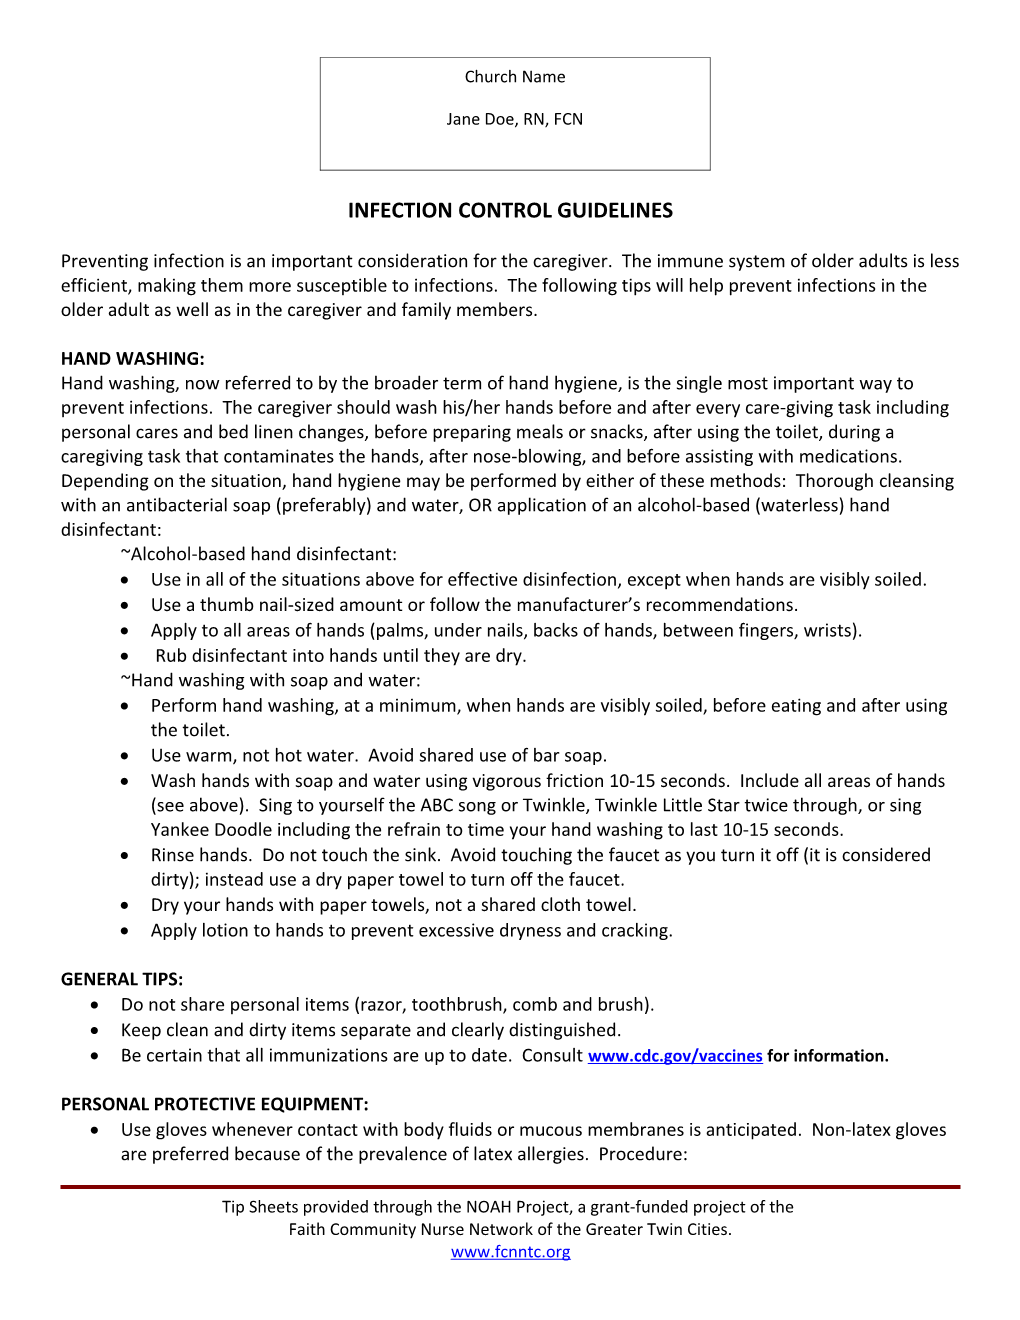 Infection Control Guidelines